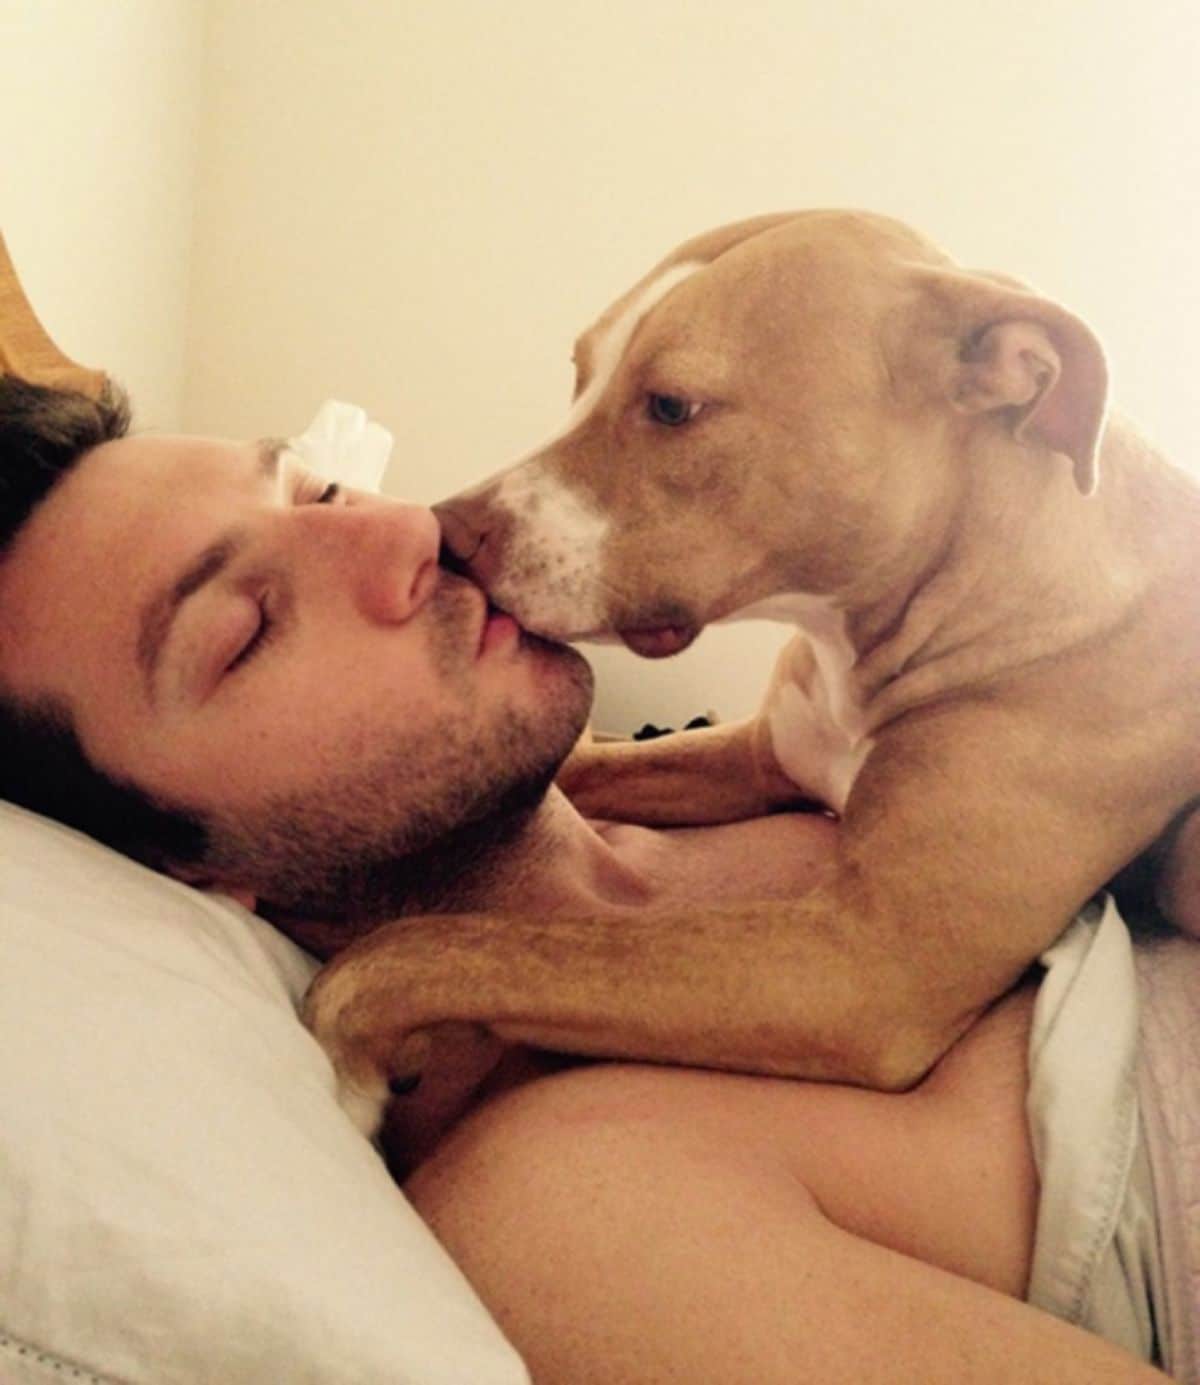 brown and white pitbull laying on a man laying on bed and the dog has its mouth on the man's mouth